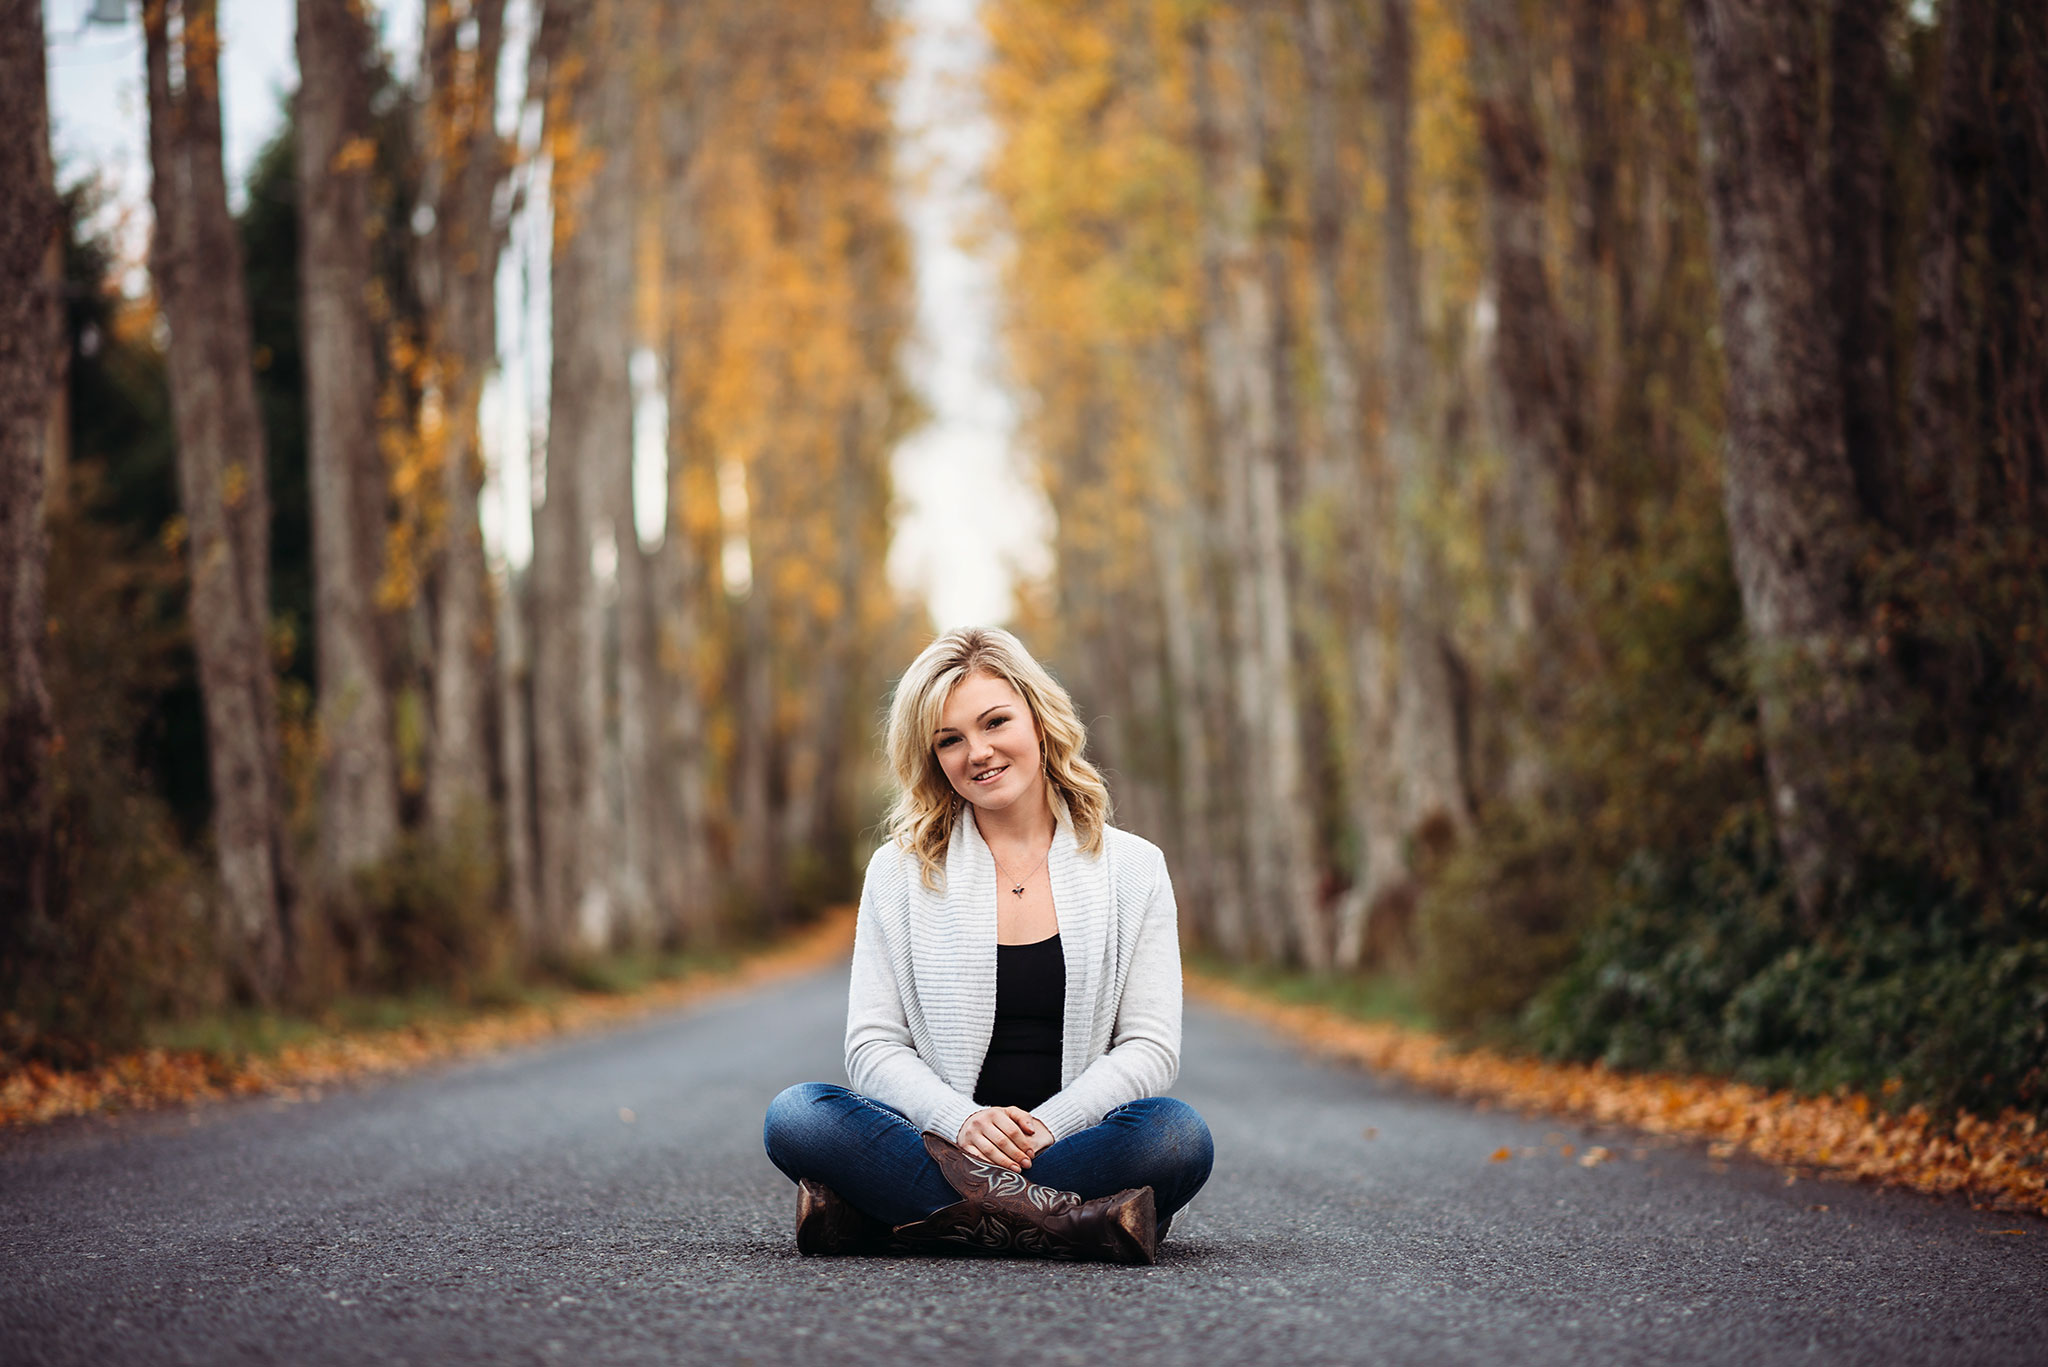 Fall outdoor portrait photography in Metchosin near Victoria, BC.